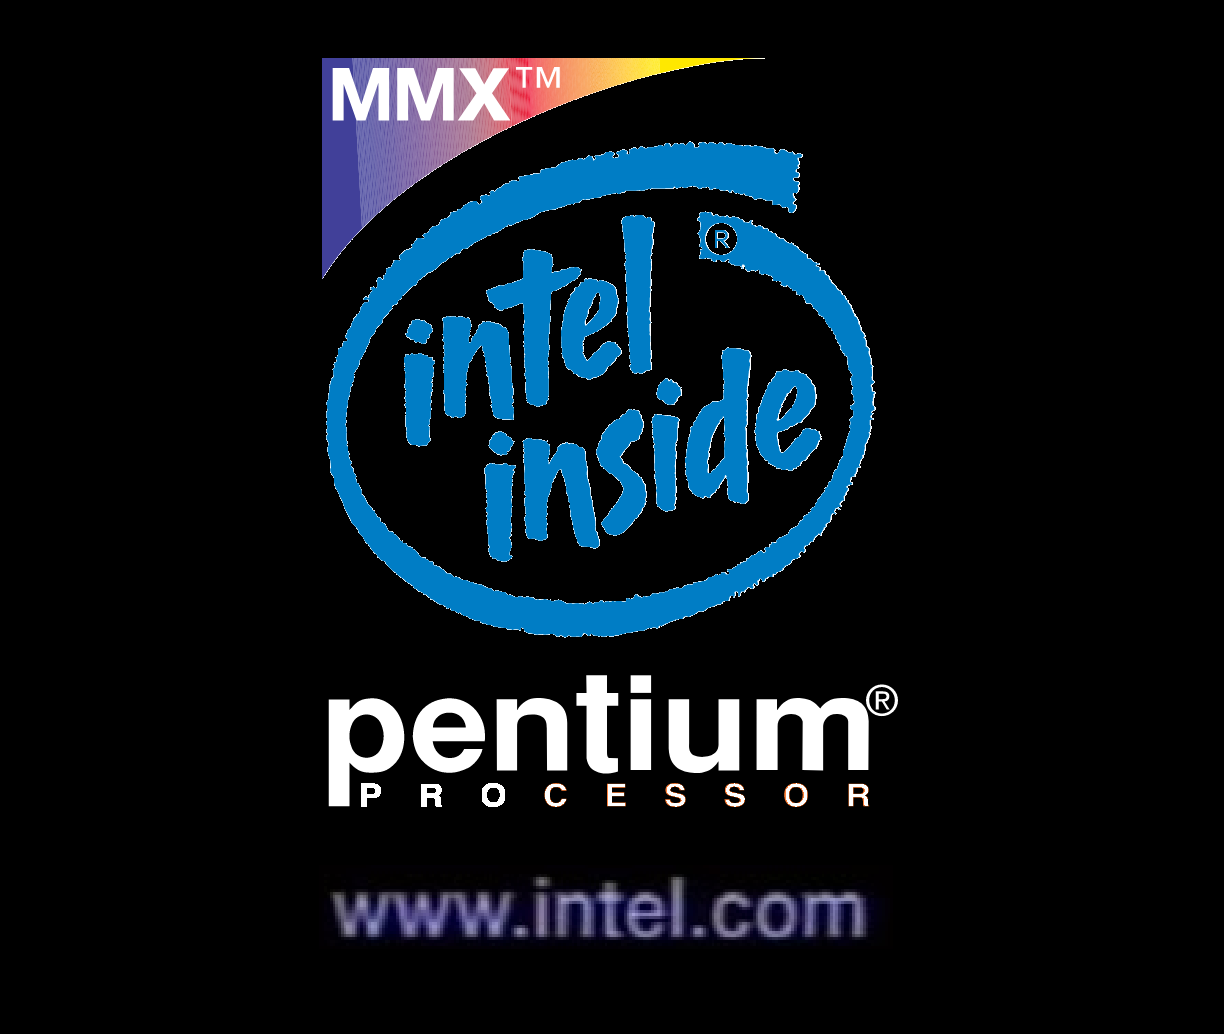 INTEL Pentium Redesign Old Logo Style 1 by SubwooferLabs on DeviantArt